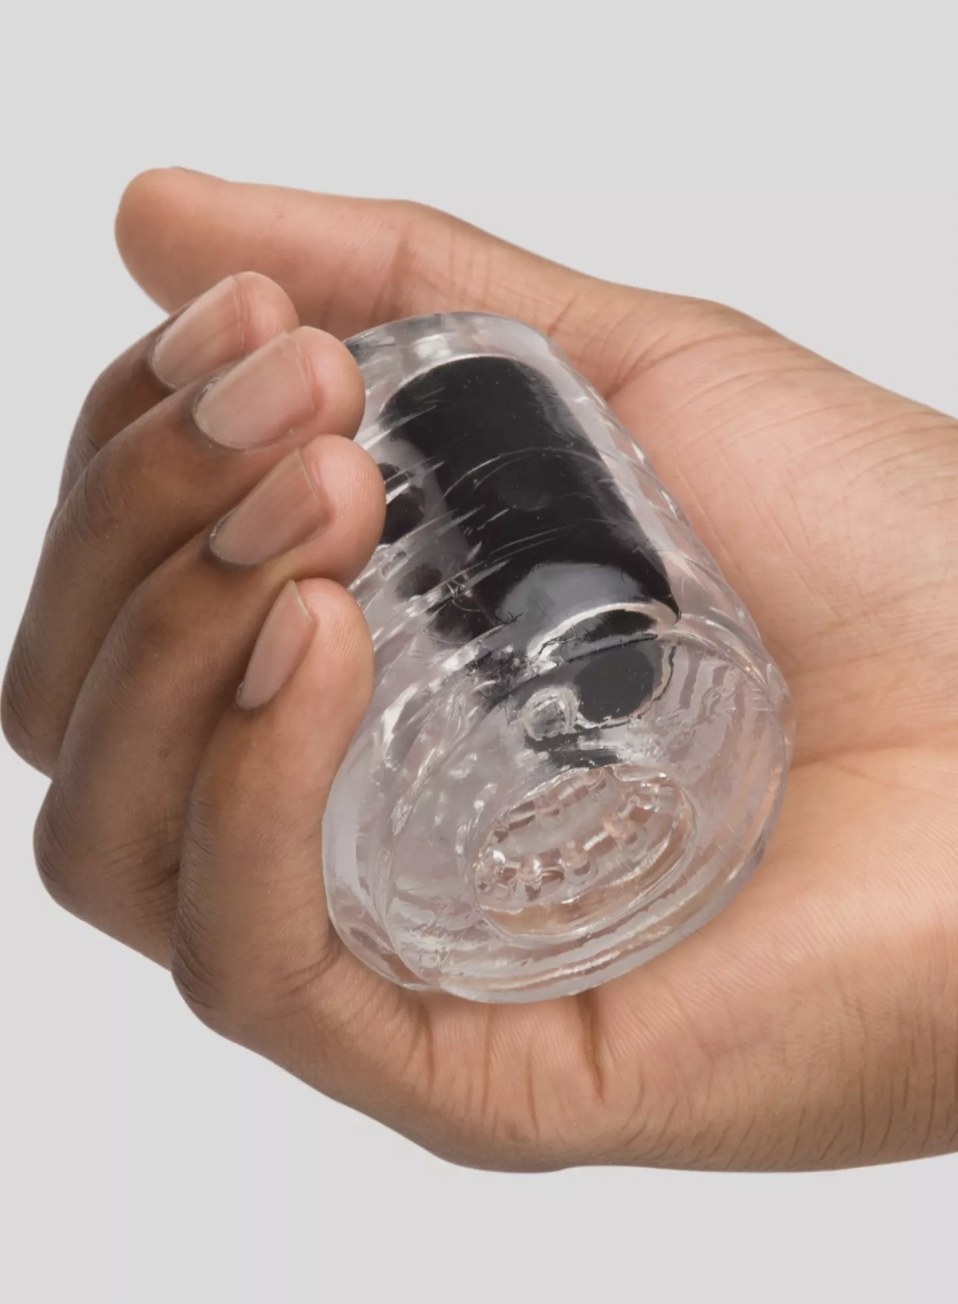 The clear vibrating stroker held in someone&#x27;s palm